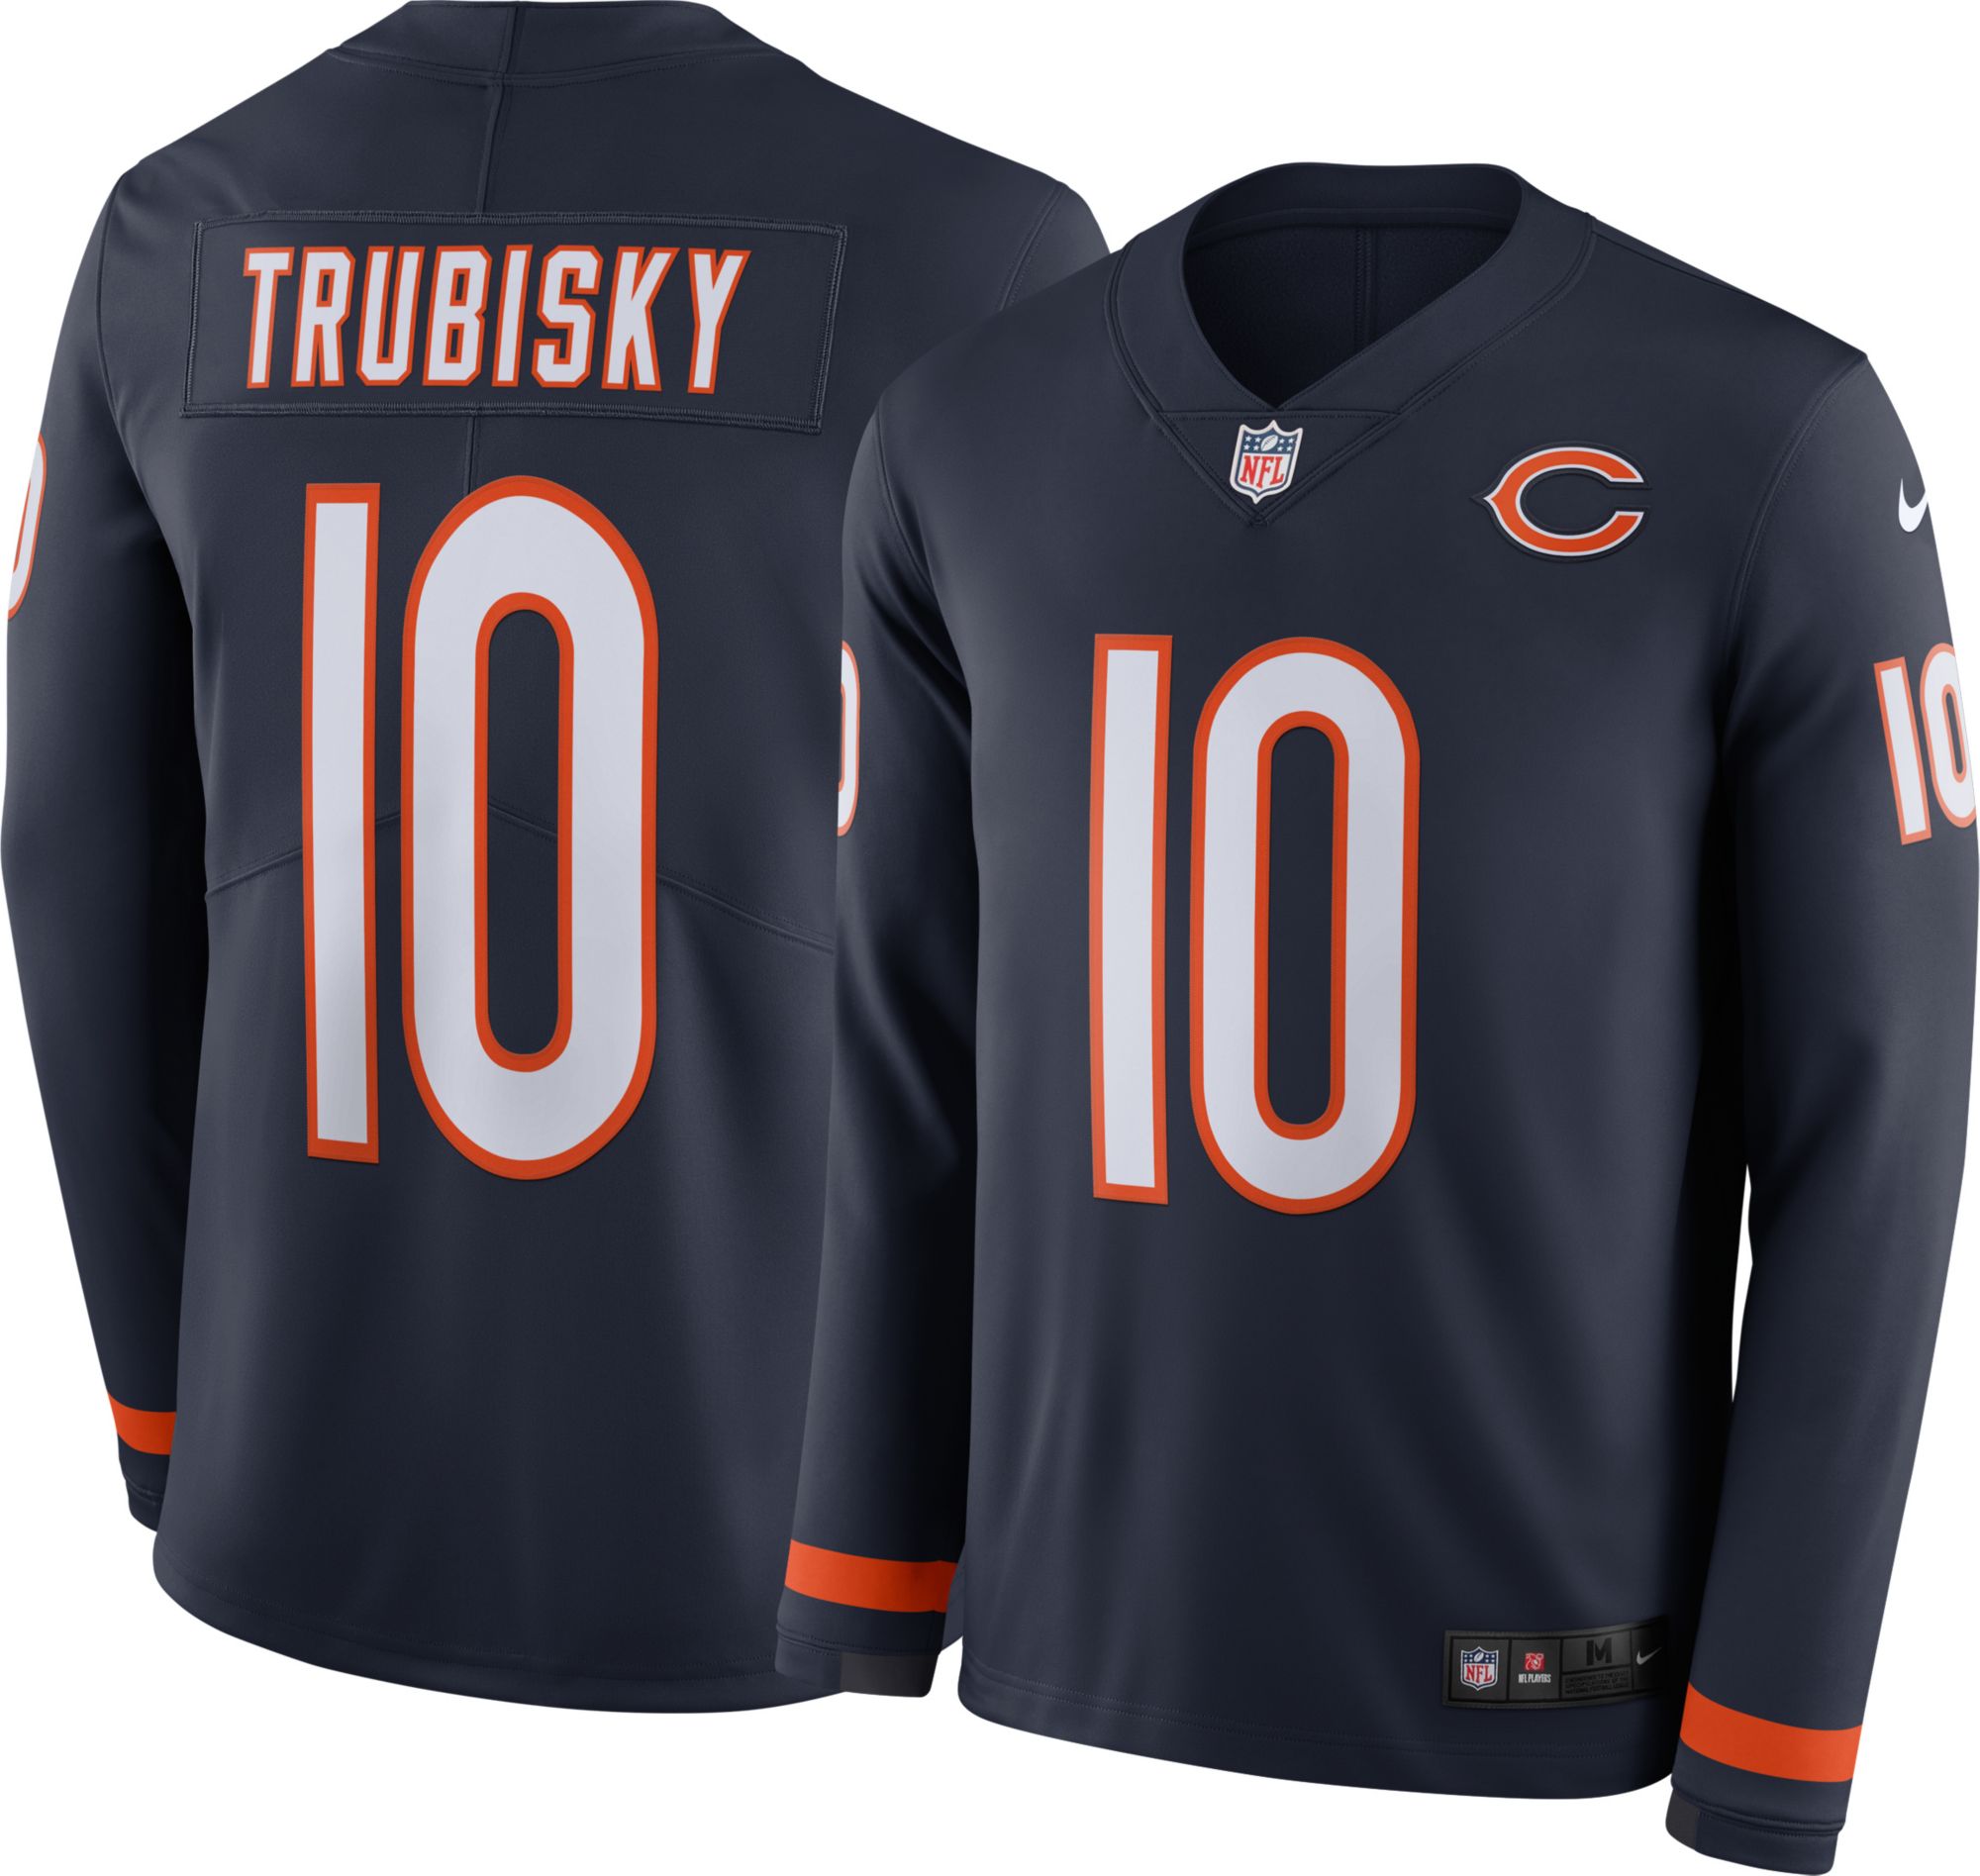 Mitchell Trubisky #10 Therma-FIT 